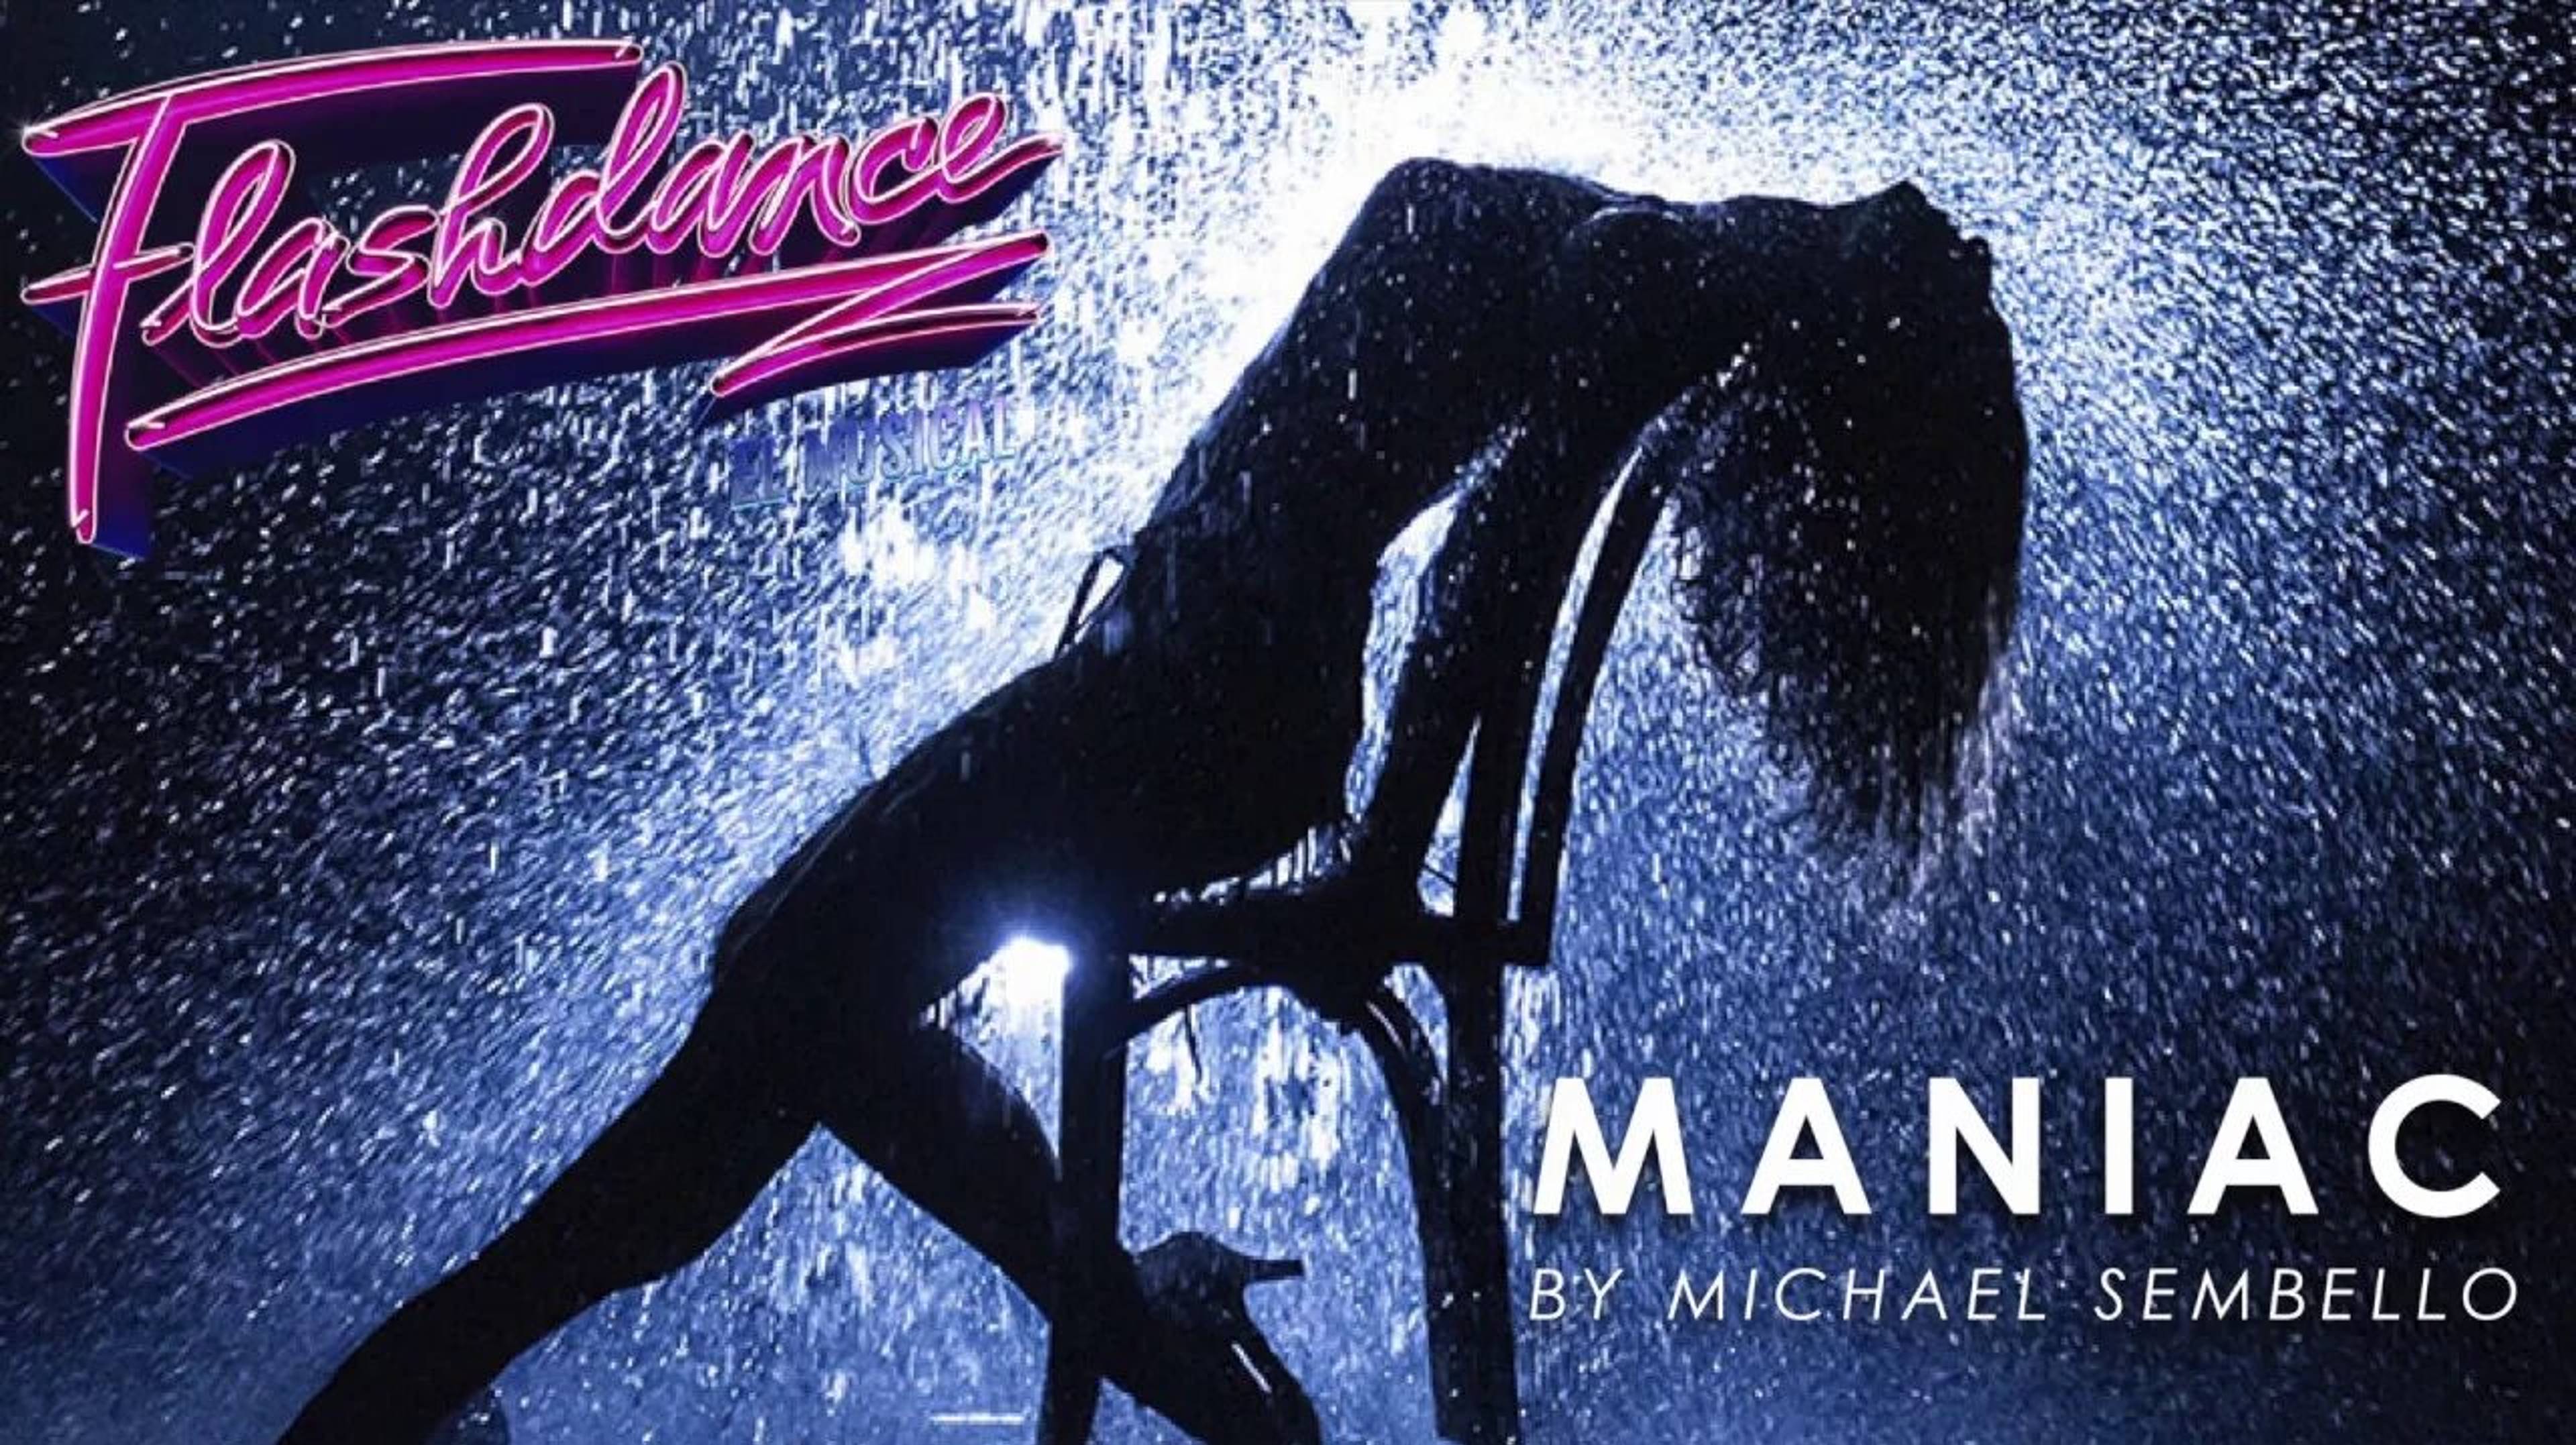 048 🥁🎸💪 Michael Sembello - Maniac [From Flashdance] Live Official Music Video 1983 Video Full HD